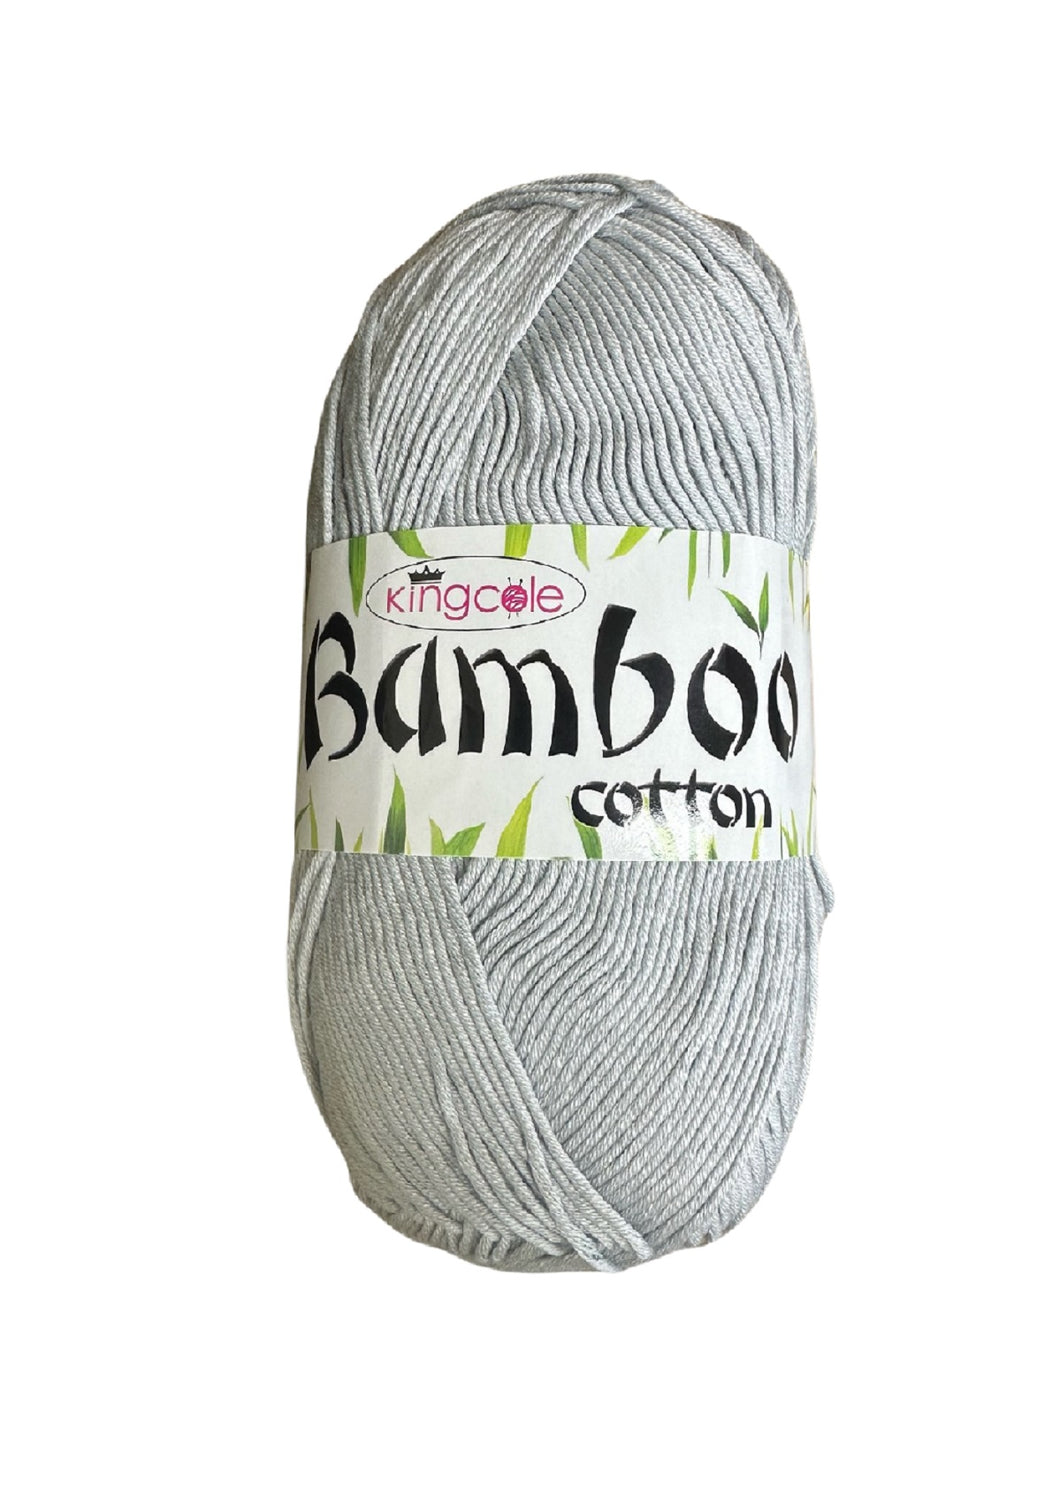 King Cole Bamboo Cotton DK (Grey 522)